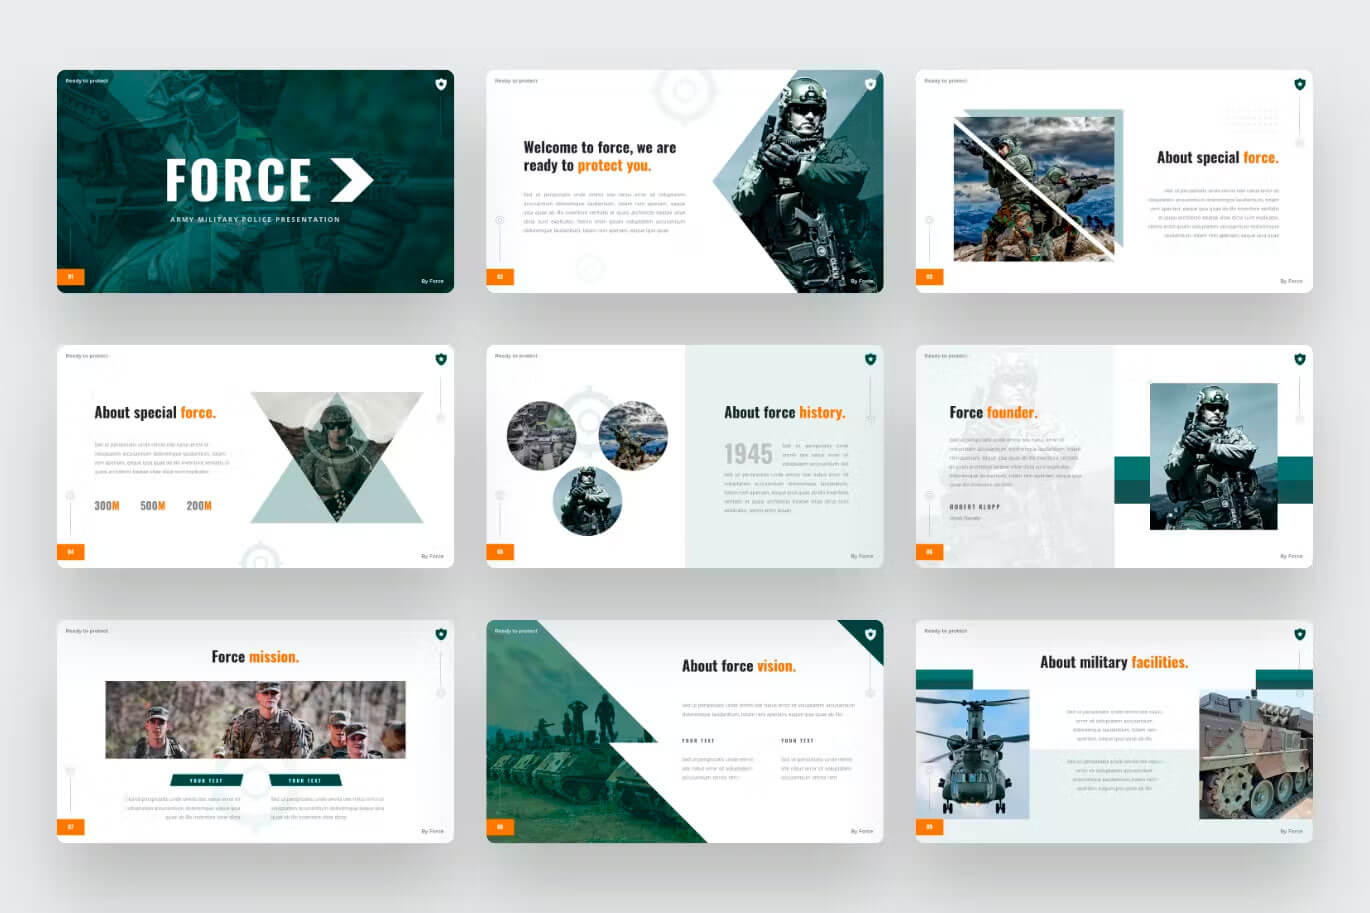 Nine slides "Force", "Welcome to force, we are ready to protect you", "About special force", "About force history", "Force founder" with army-themed powerpoint templates.